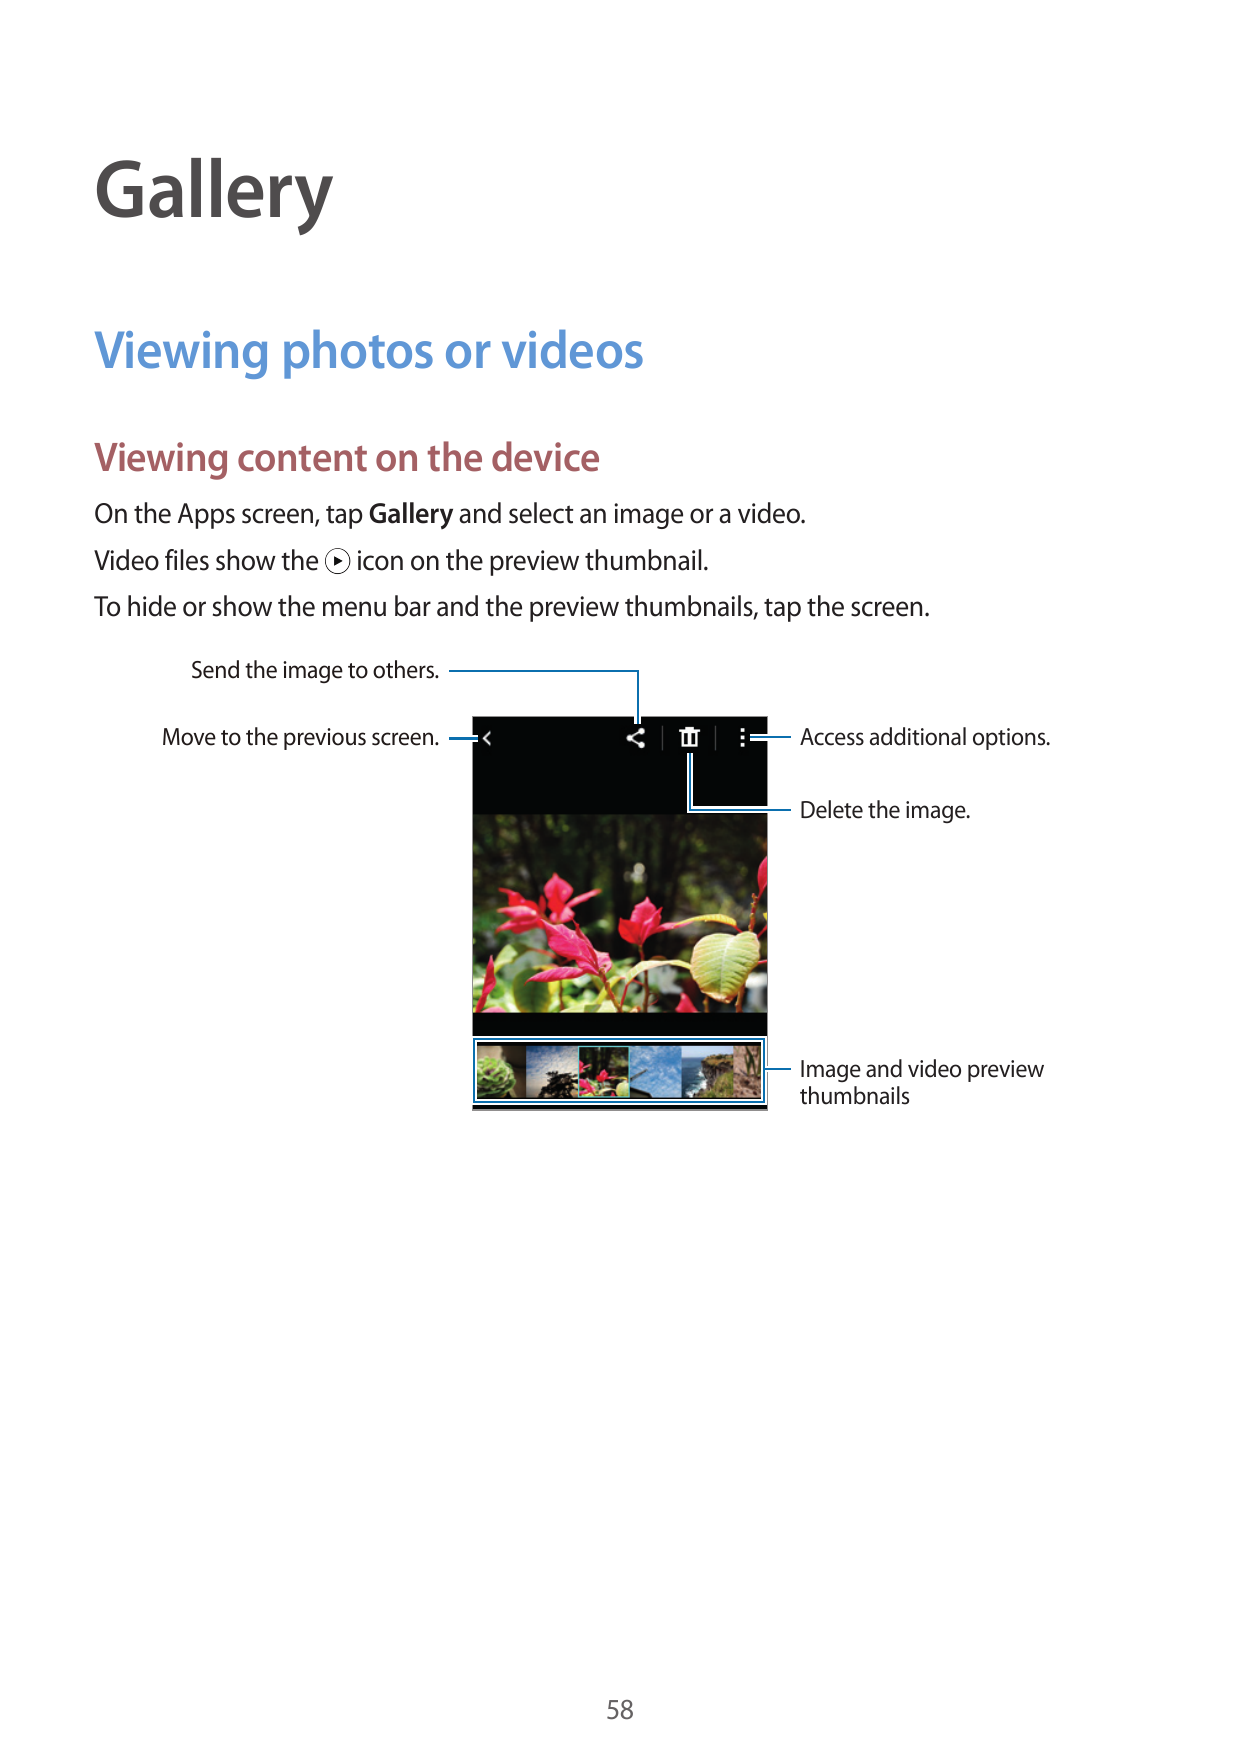 GalleryViewing photos or videosViewing content on the deviceOn the Apps screen, tap Gallery and select an image or a video.Video